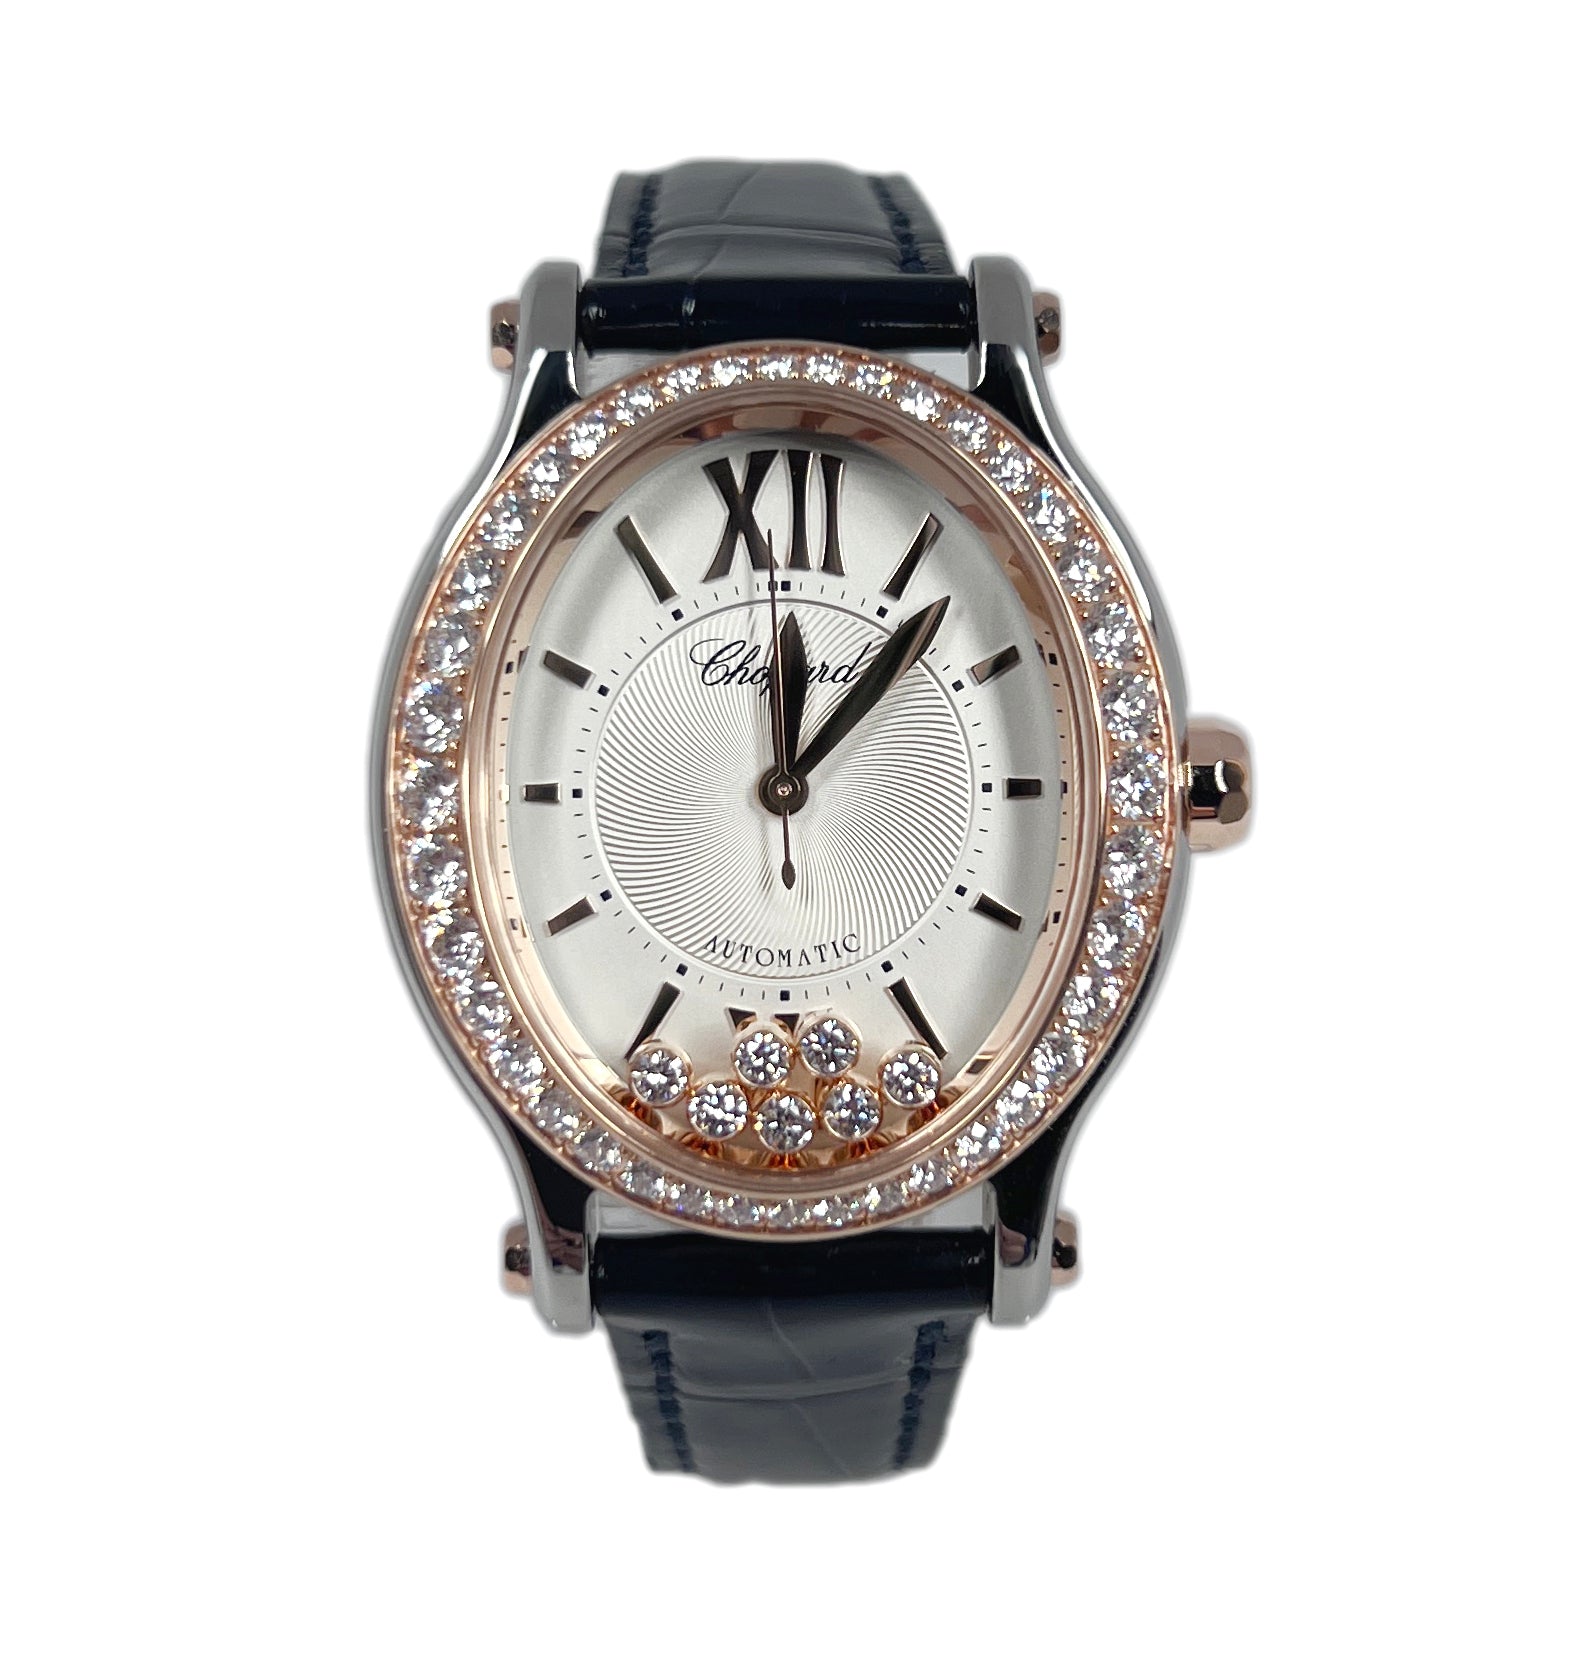 Chopard Happy Sport Oval Stainless Steel and Ethical Rose Gold & Diamonds Ladies Watch